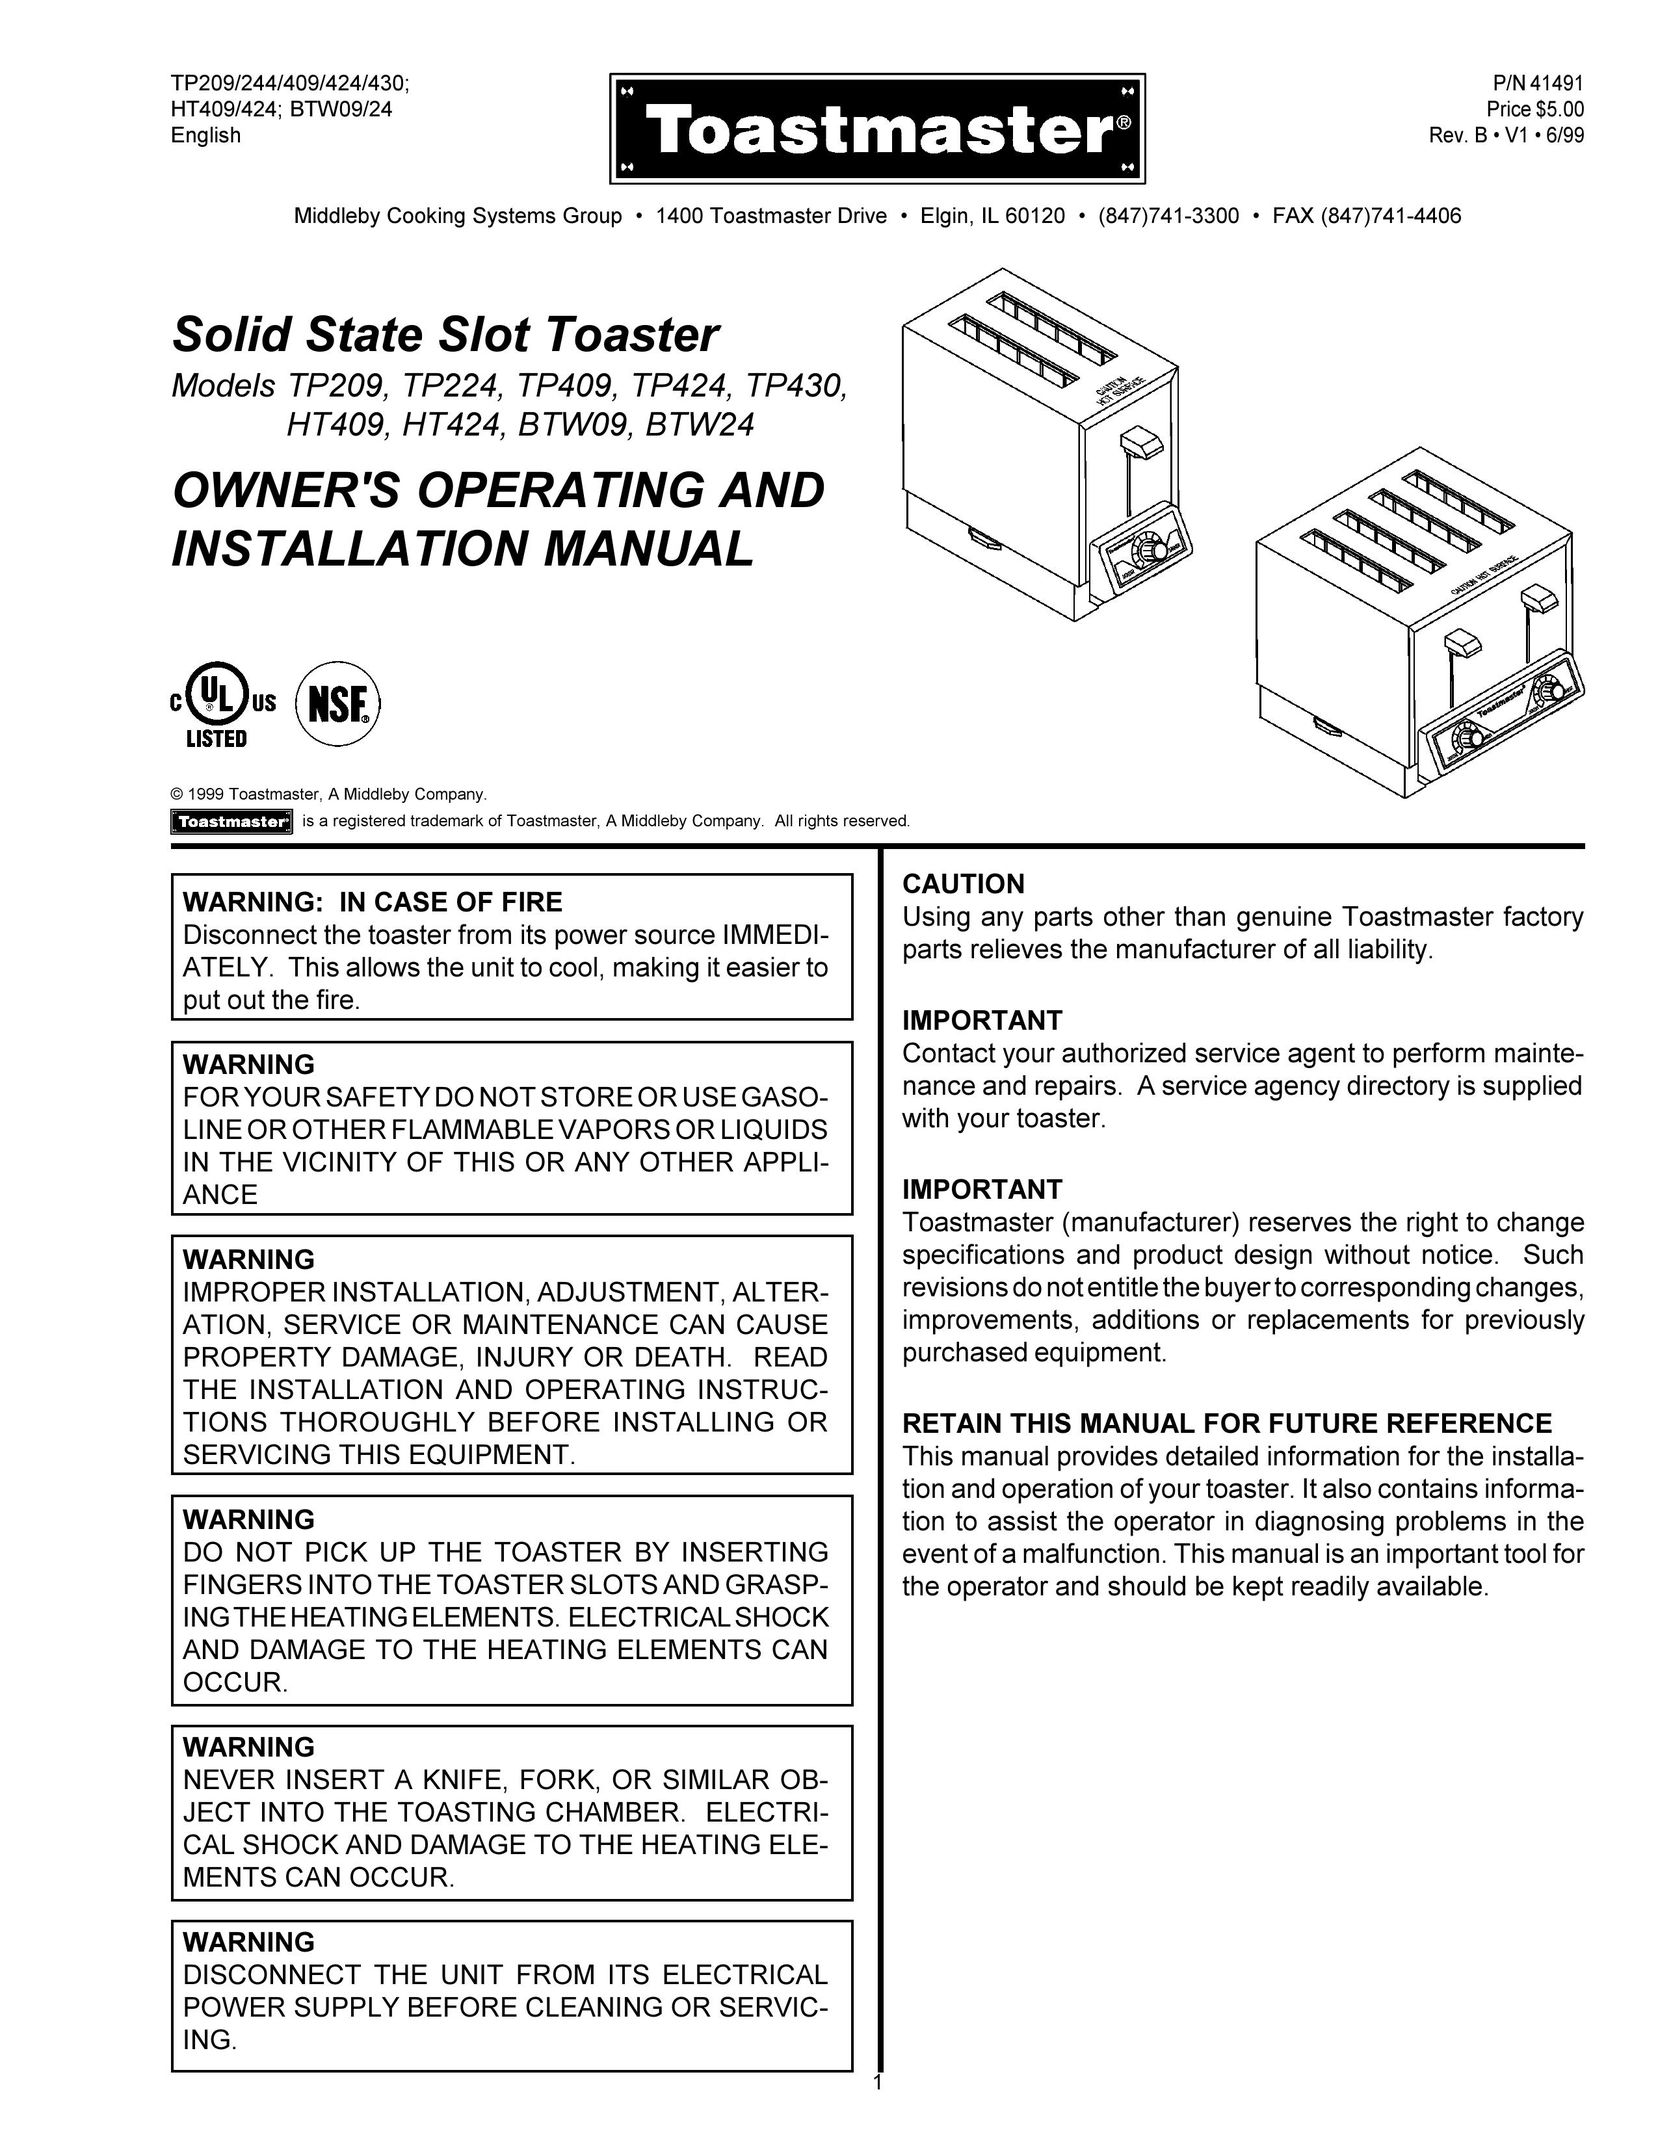 Toastmaster TP430 Car Stereo System User Manual